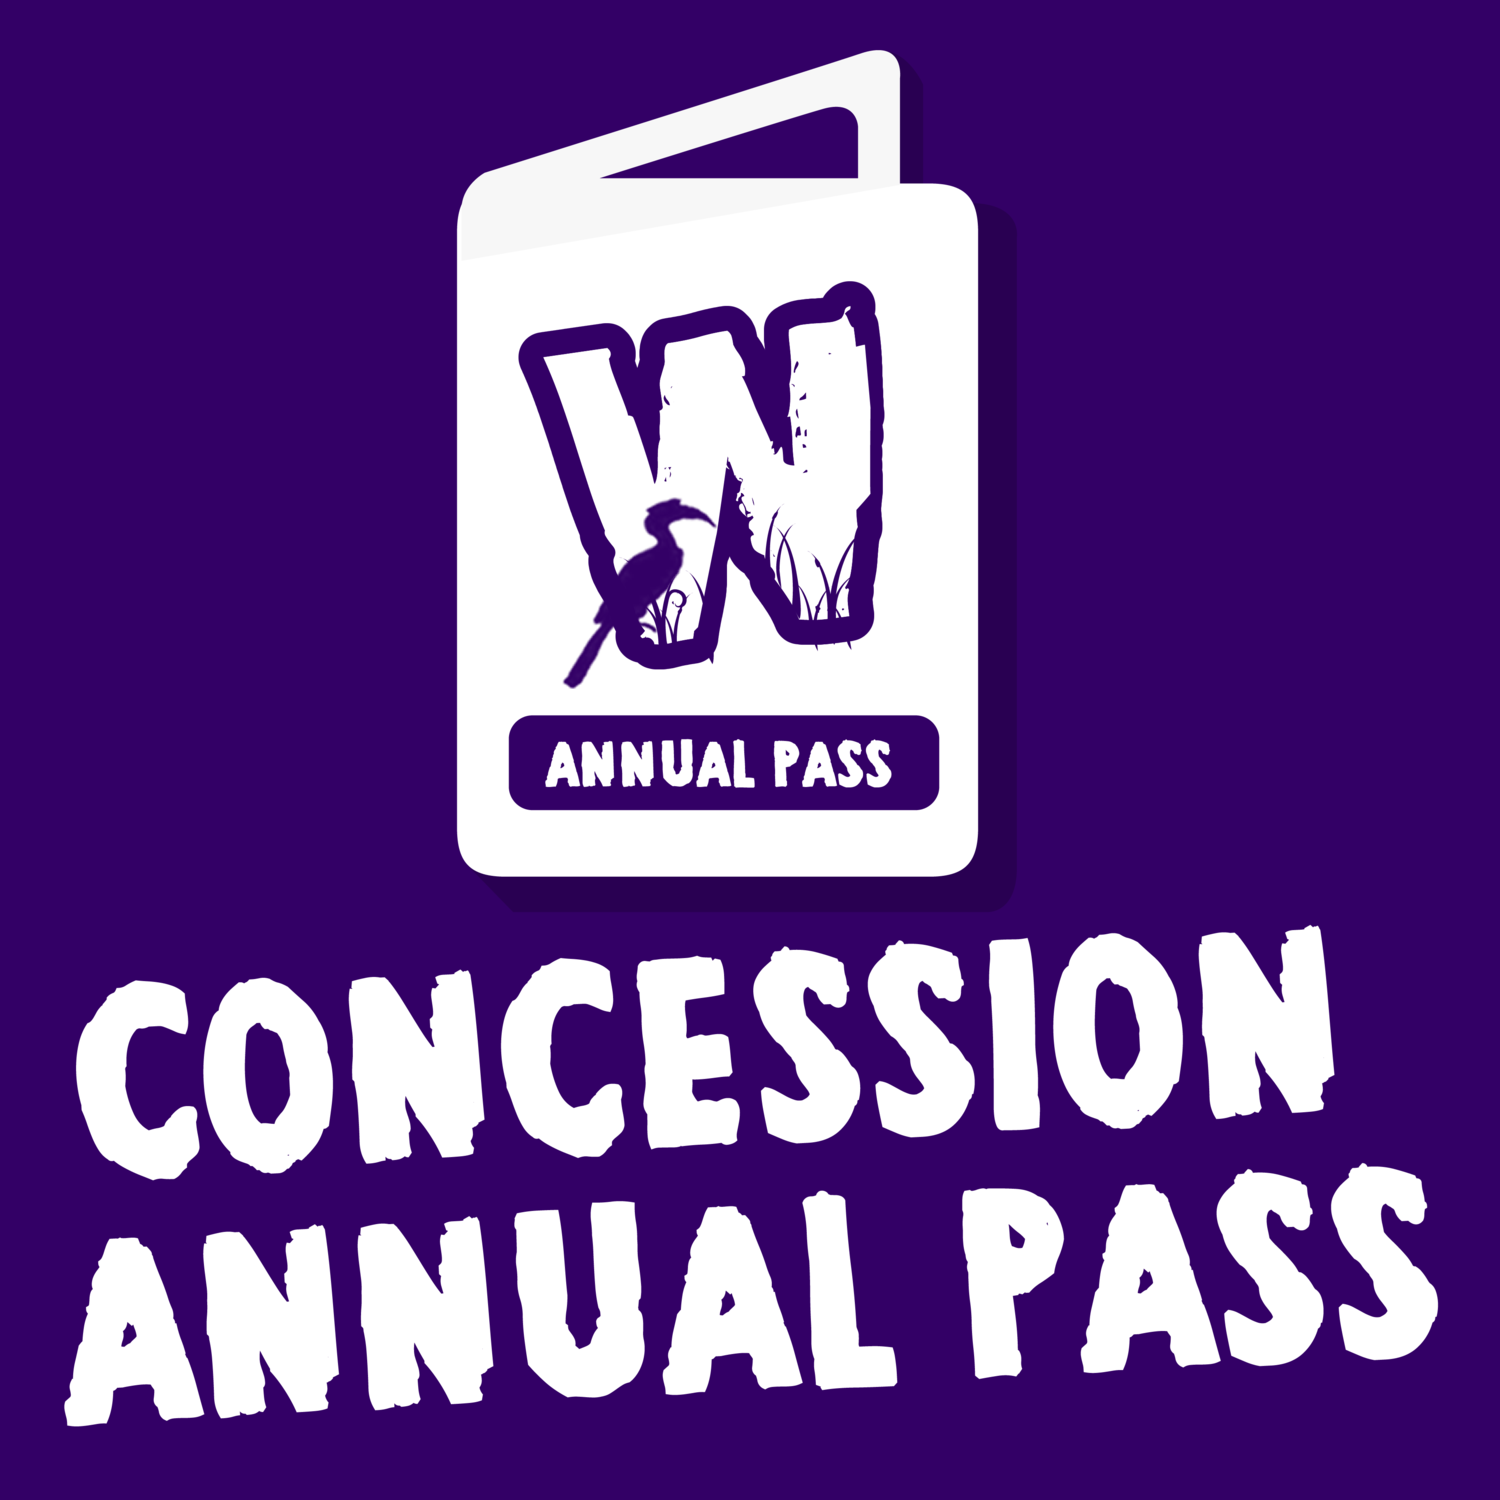 Wild Zoological Park X1 Concession ANNUAL PASS